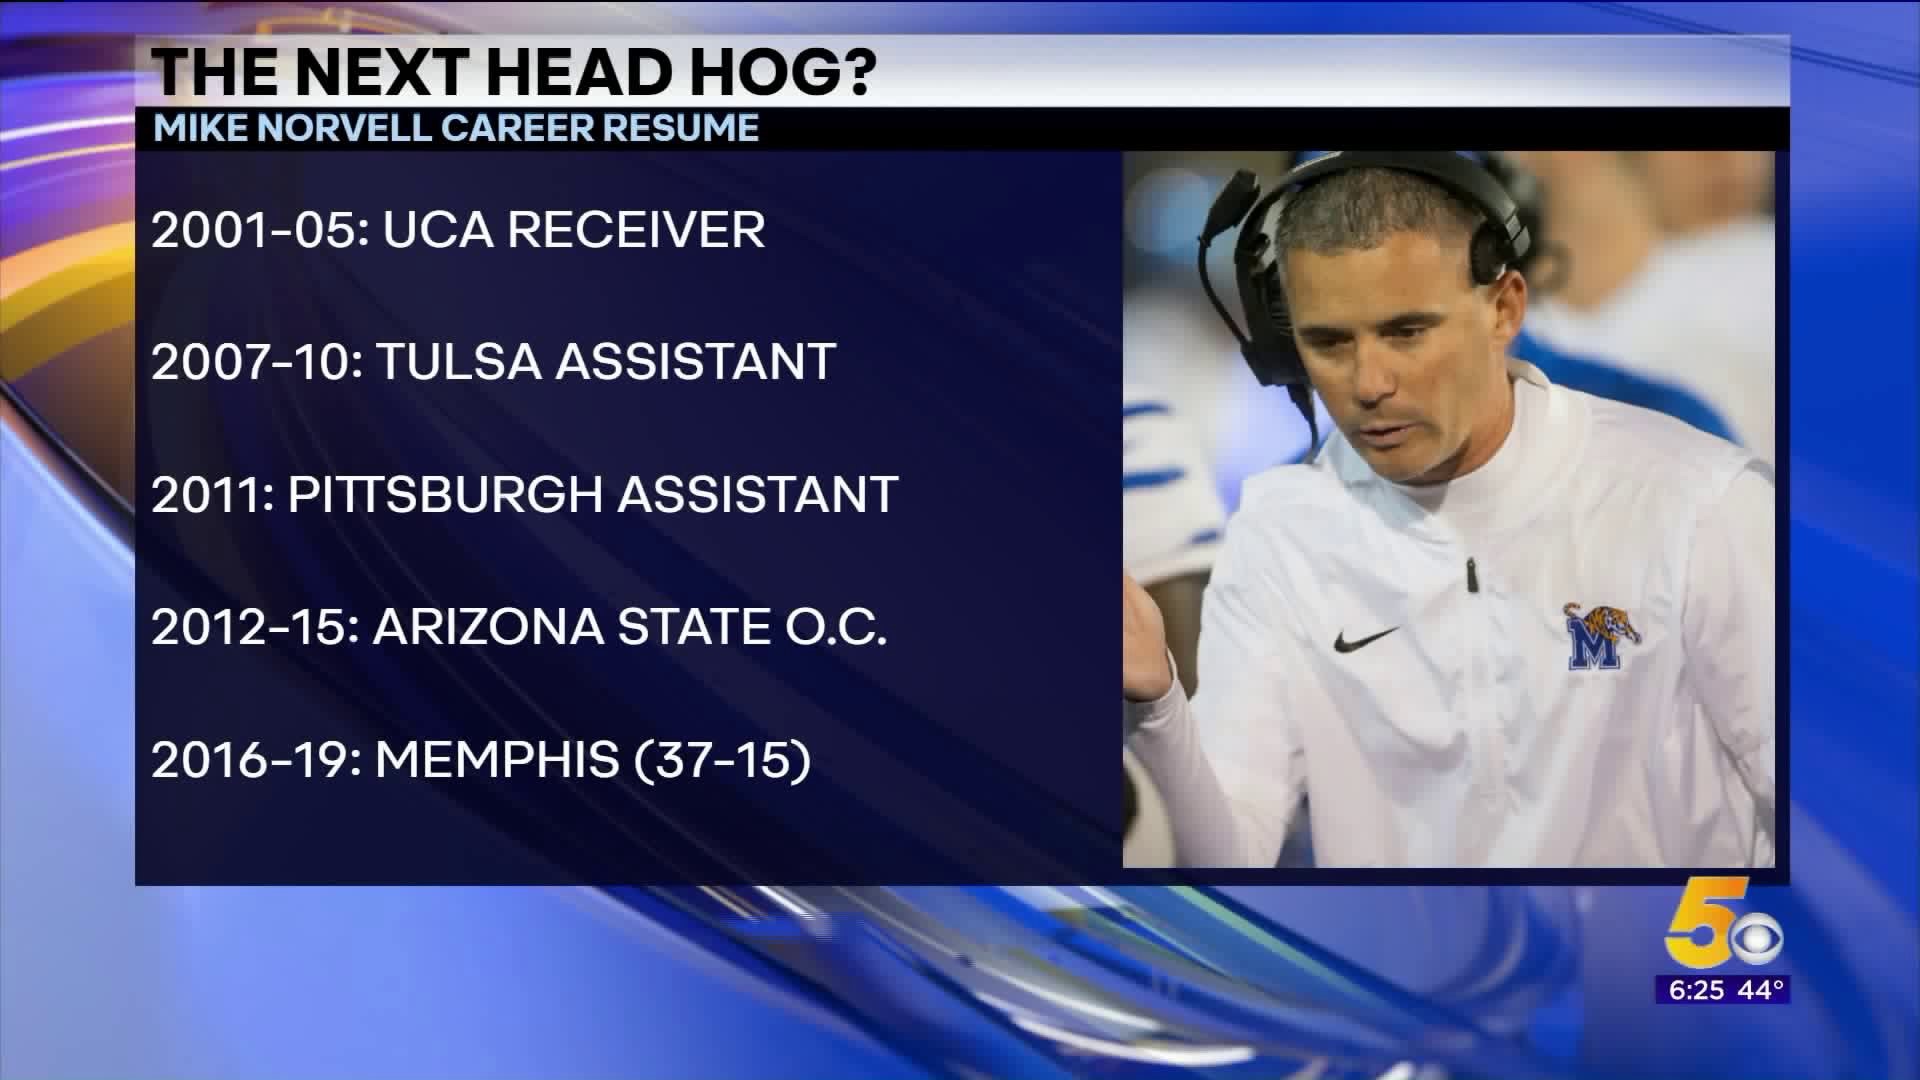 A closer look at Mike Norvell